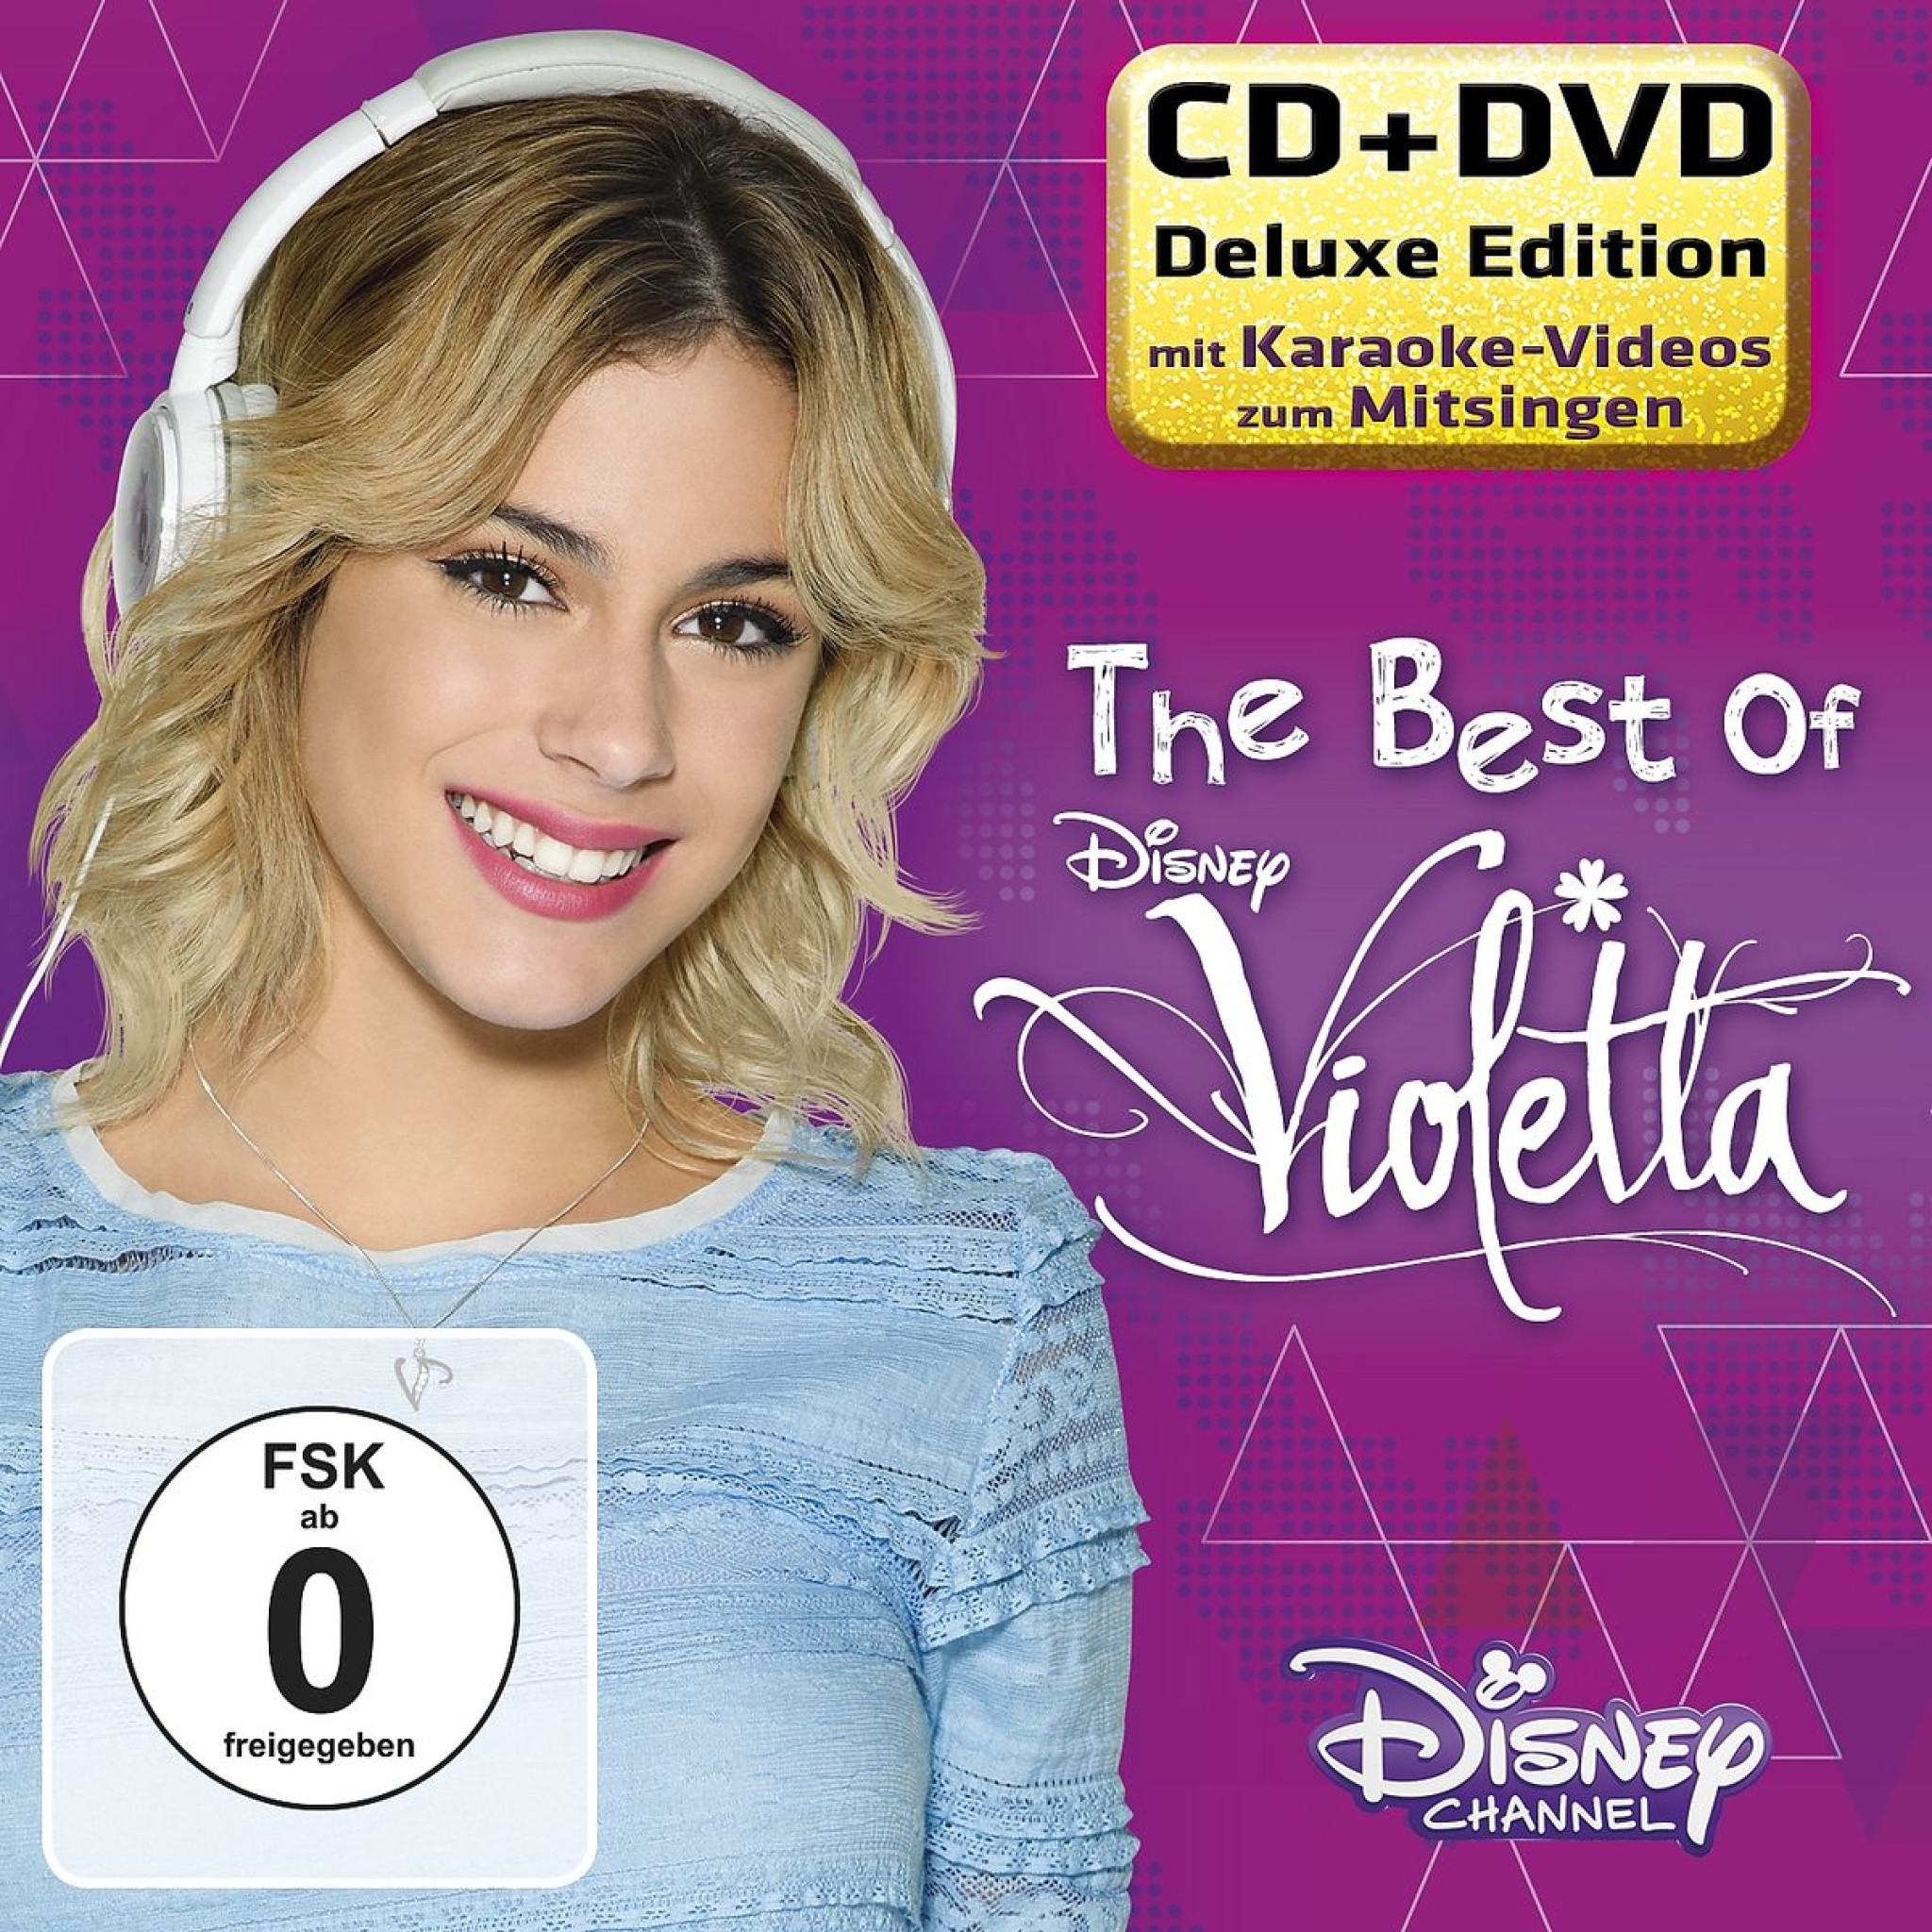 The Best Of Violetta - Deluxe CD+DVD